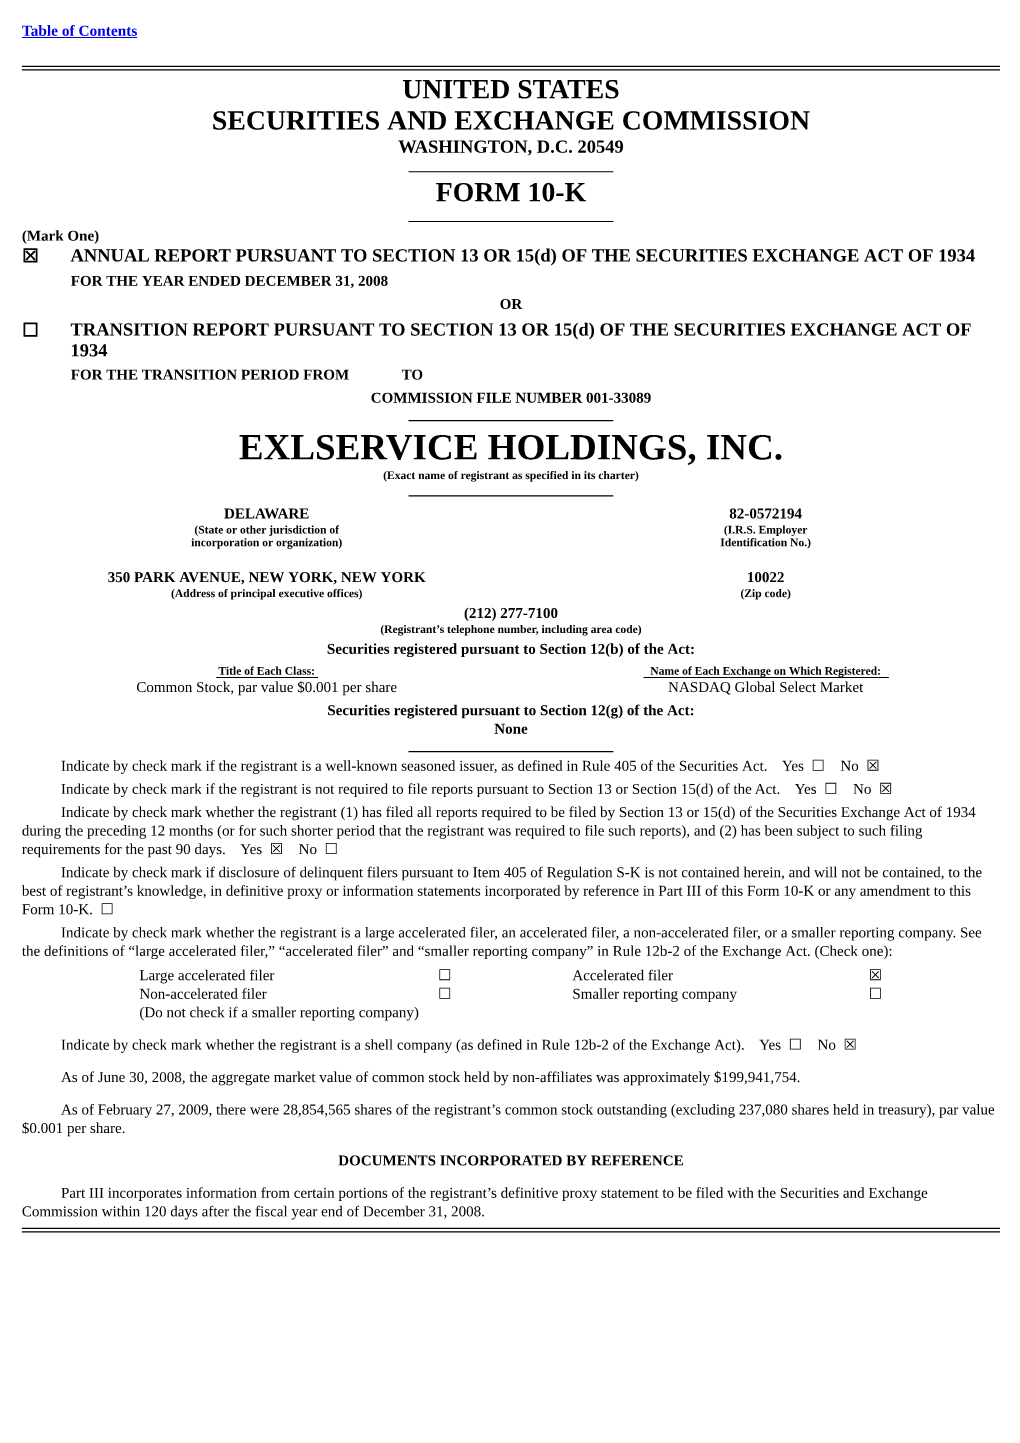 EXLSERVICE HOLDINGS, INC. (Exact Name of Registrant As Specified in Its Charter)